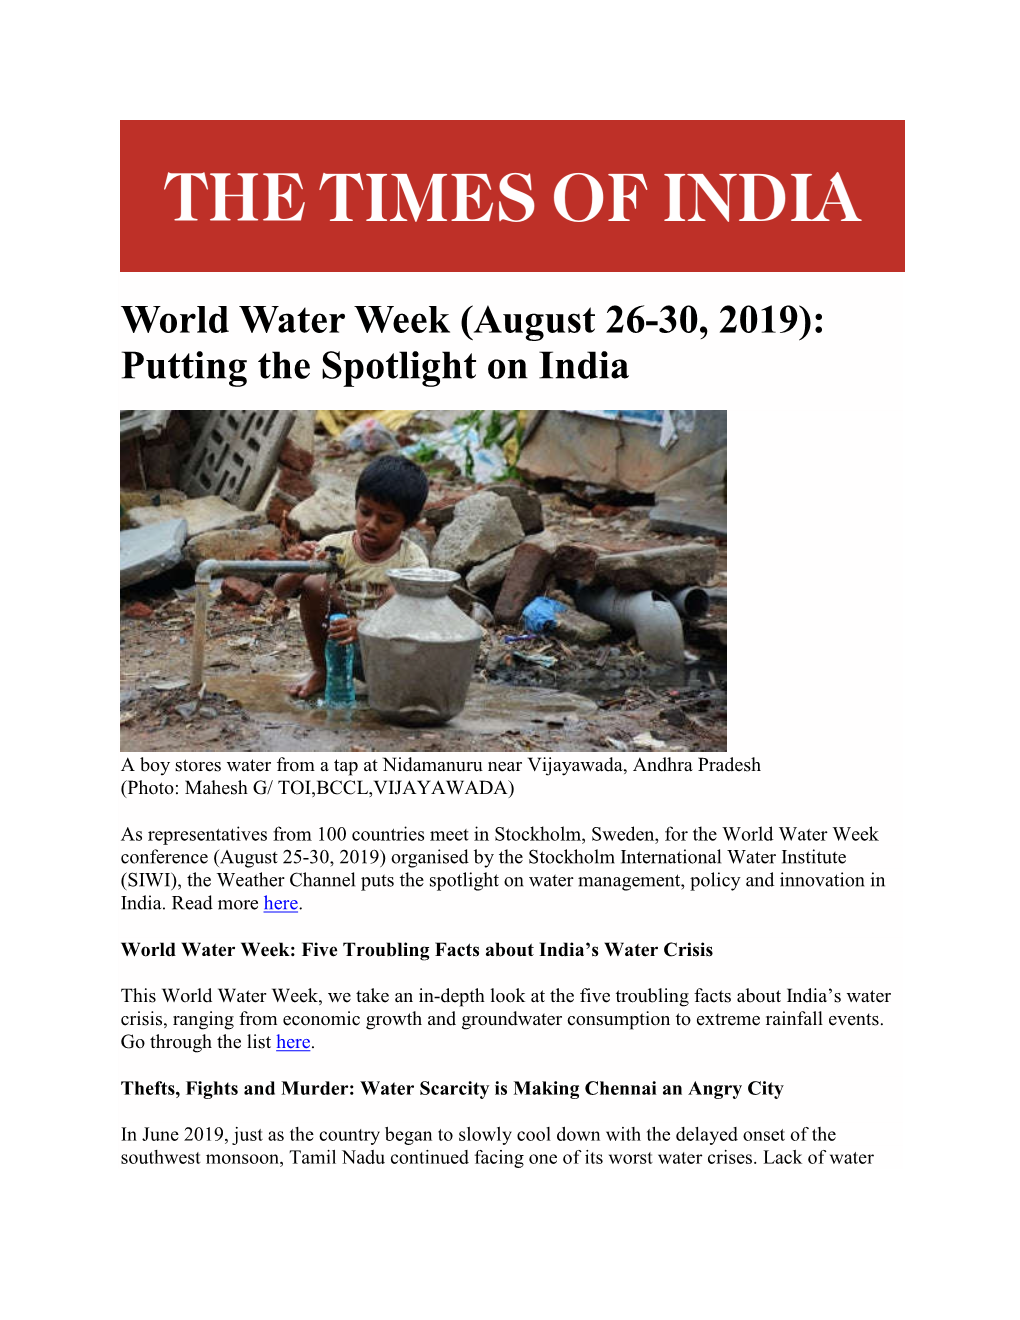 World Water Week (August 26-30, 2019): Putting the Spotlight on India